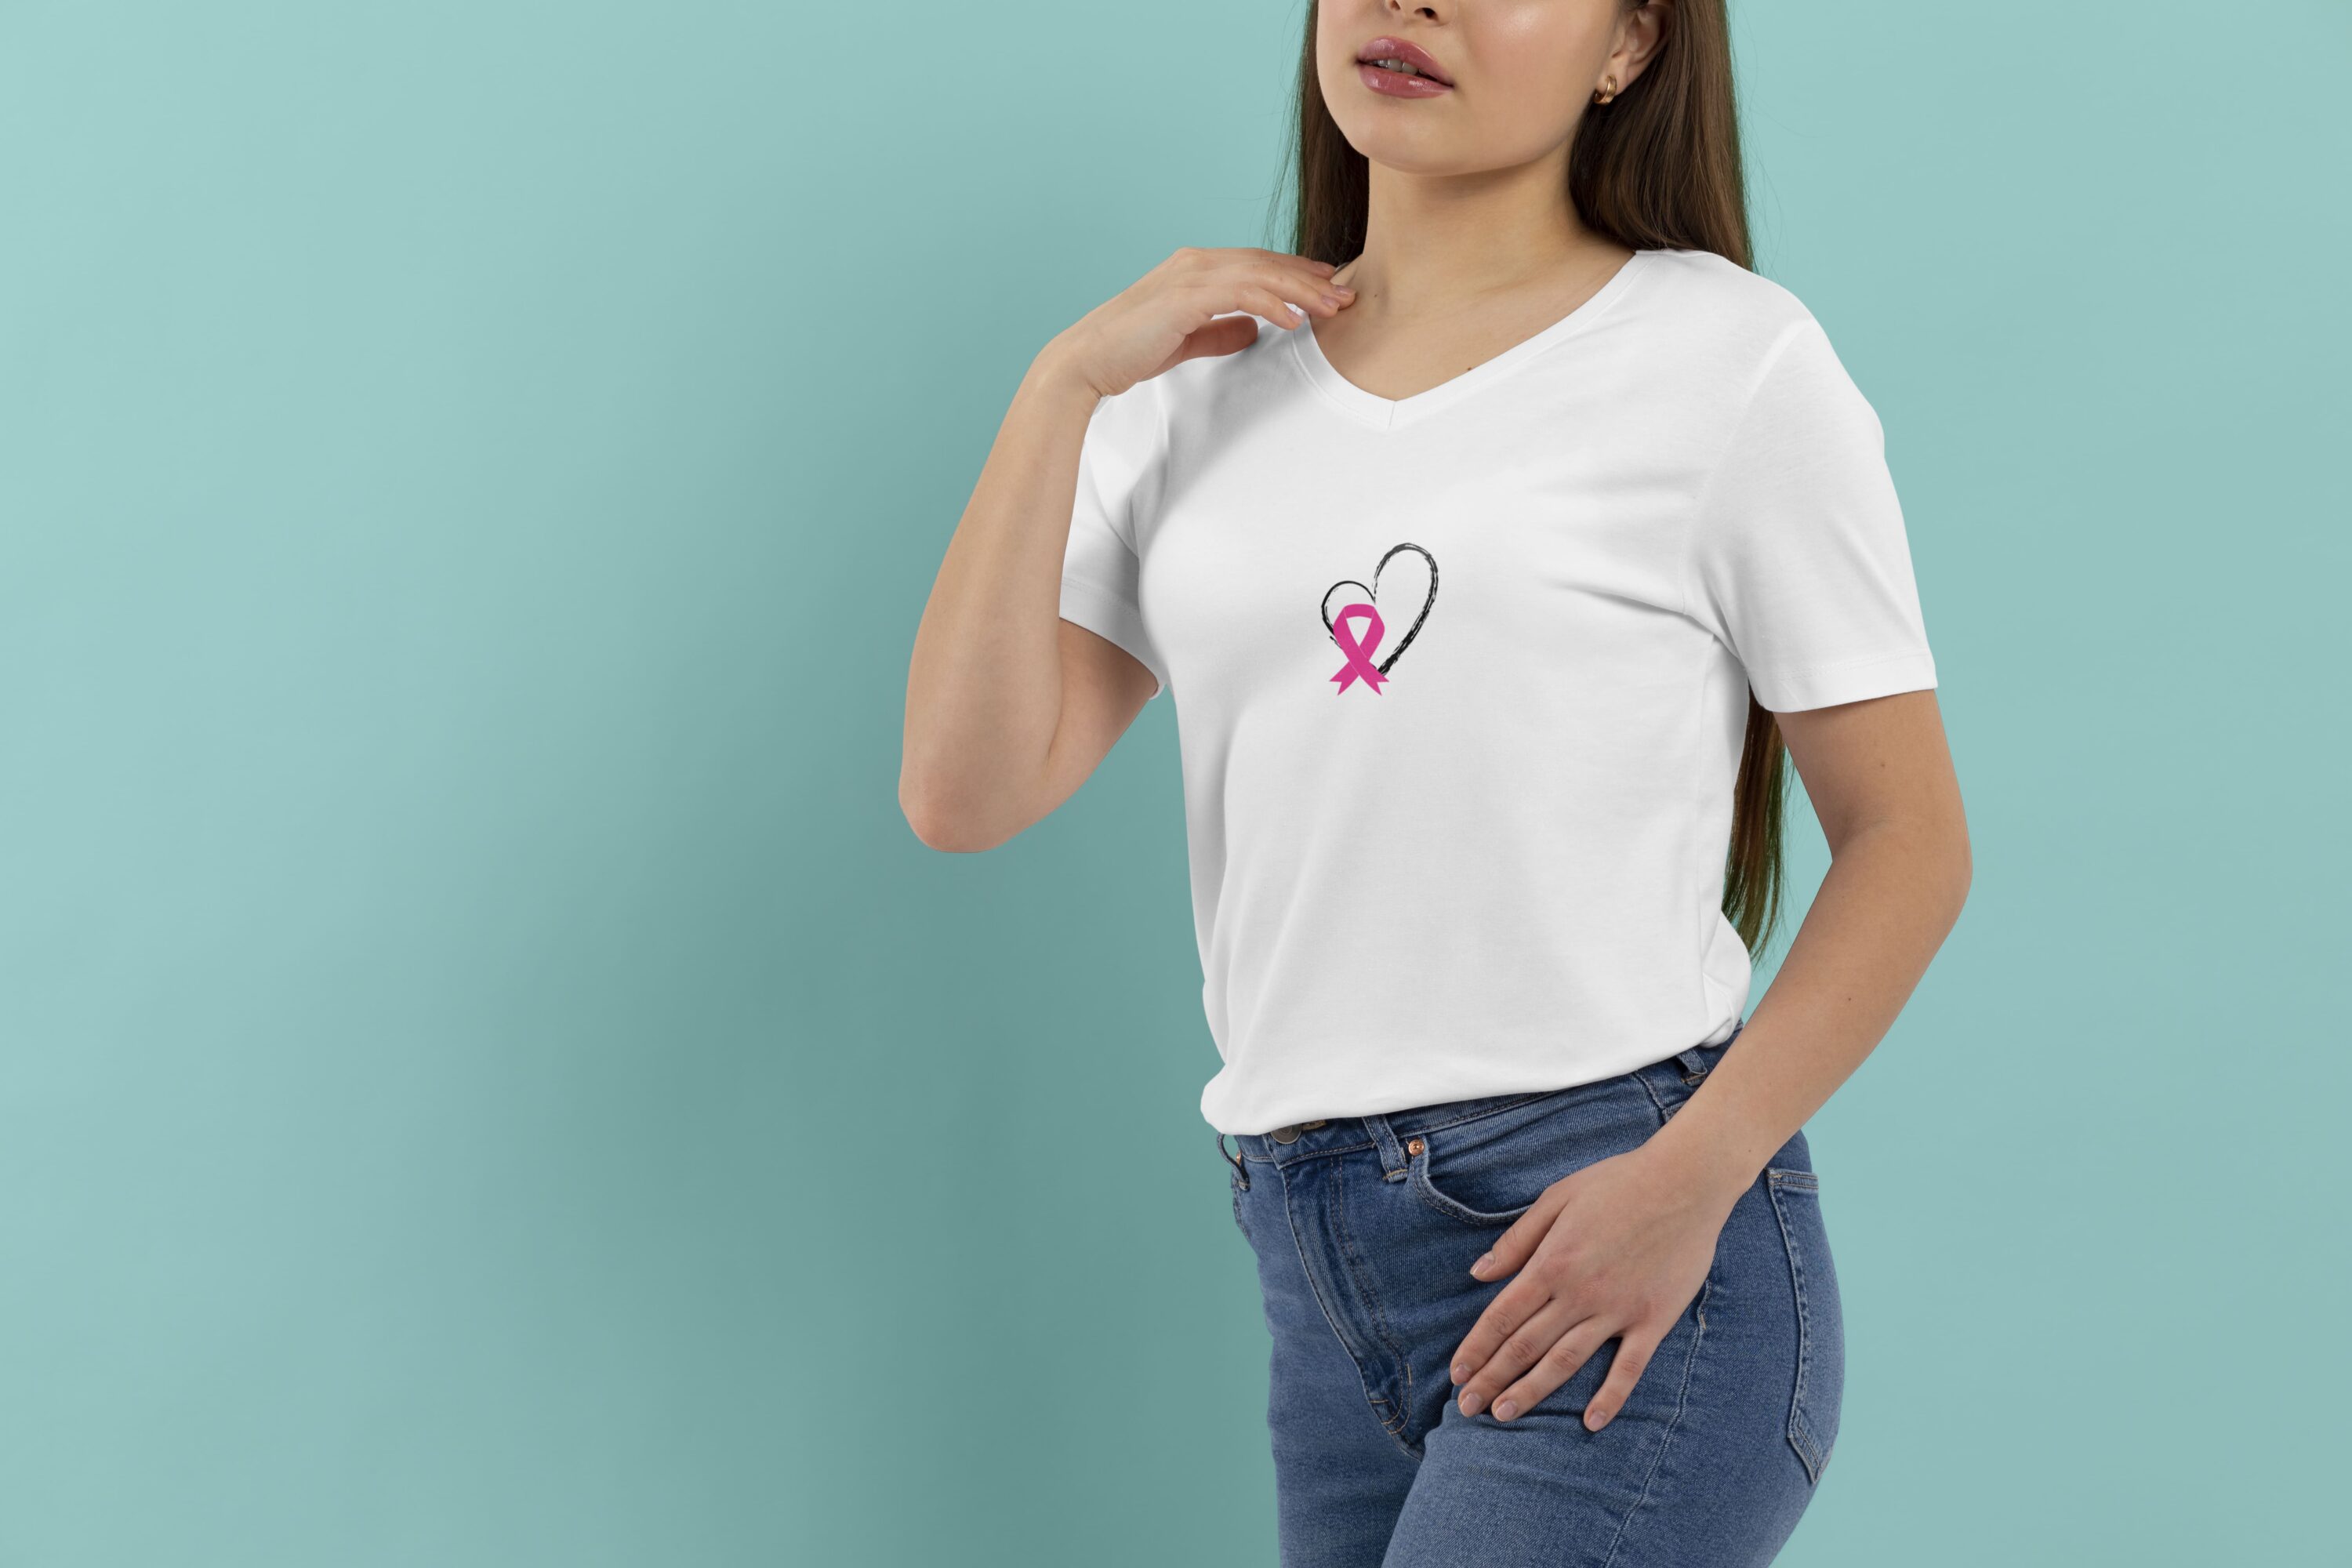 Simple white t-shirt with the pink breast cancer ribbon in a heart.